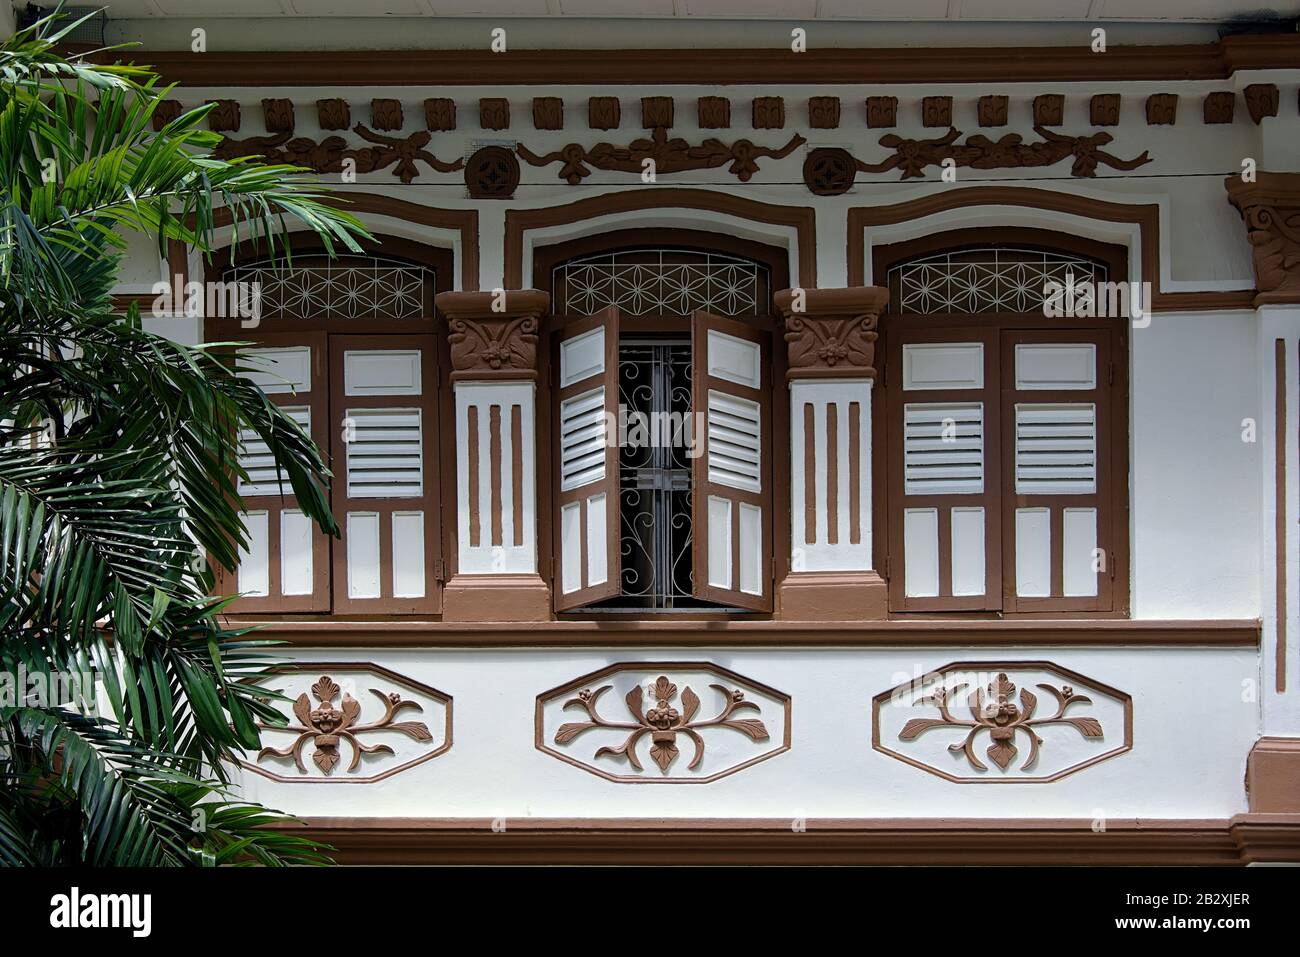 Singapore shophouse with brown and white wooden shutters and ornate stonework in historic Geylang in exterior front view Stock Photo